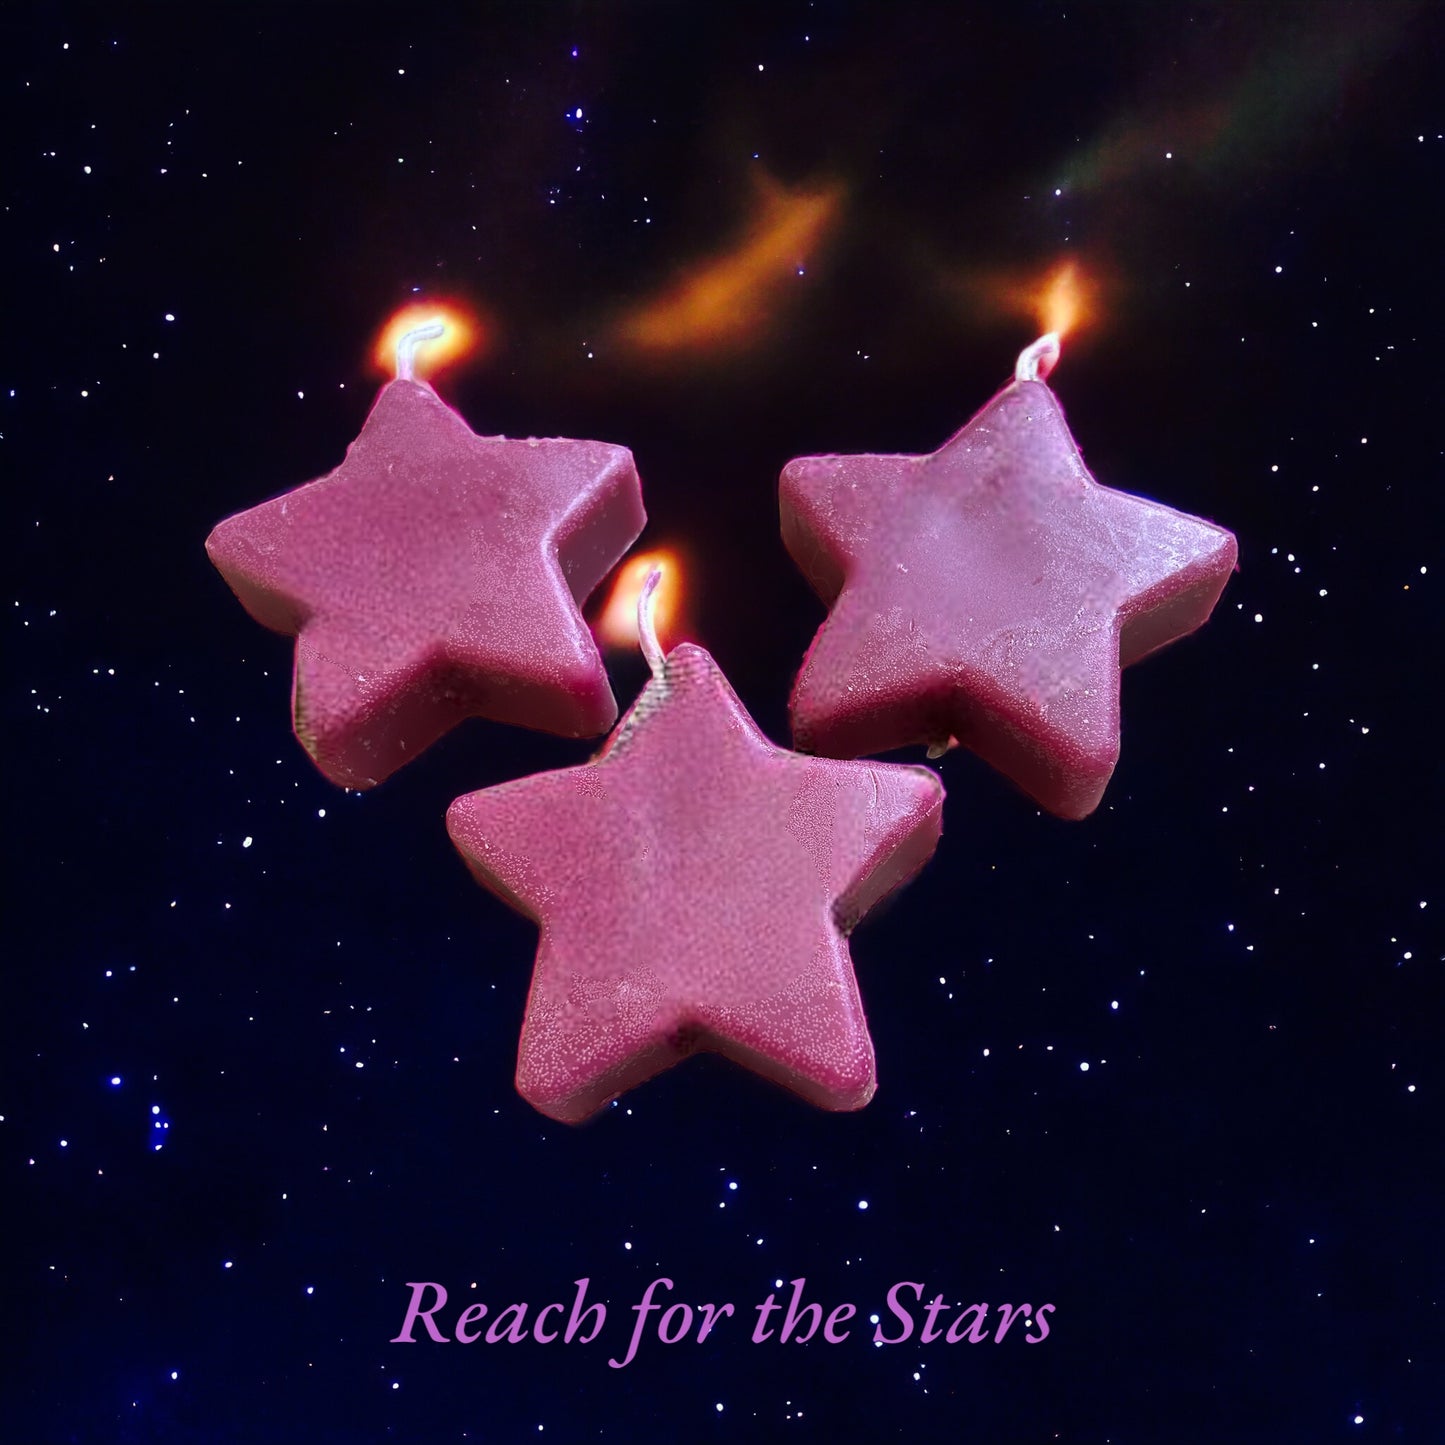 Beacon of light Star- shaped candles